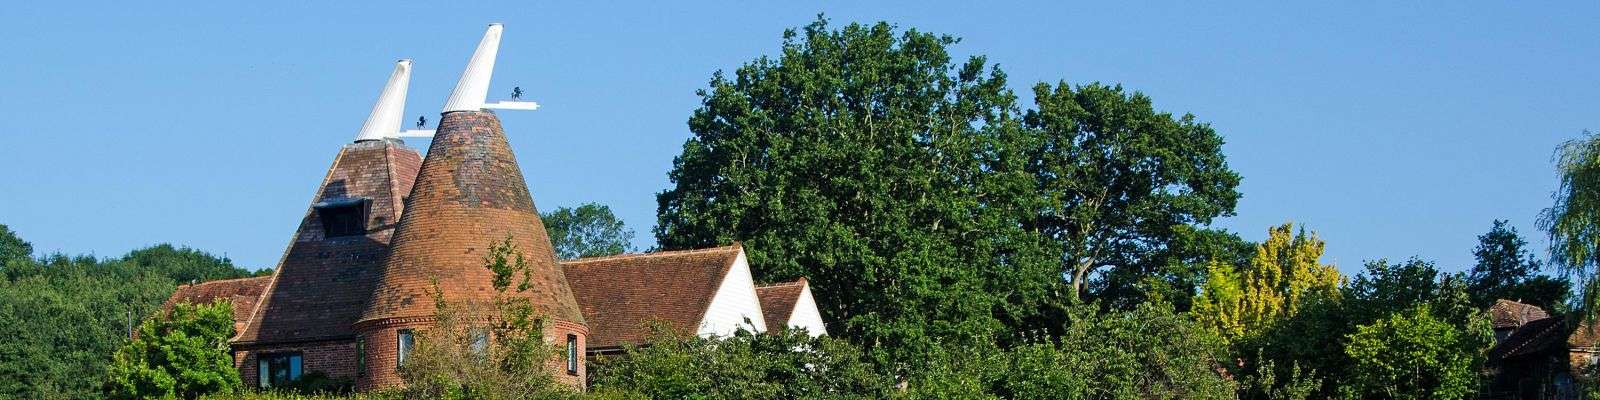 Holiday Cottages In Kent To Rent Self Catering Kent